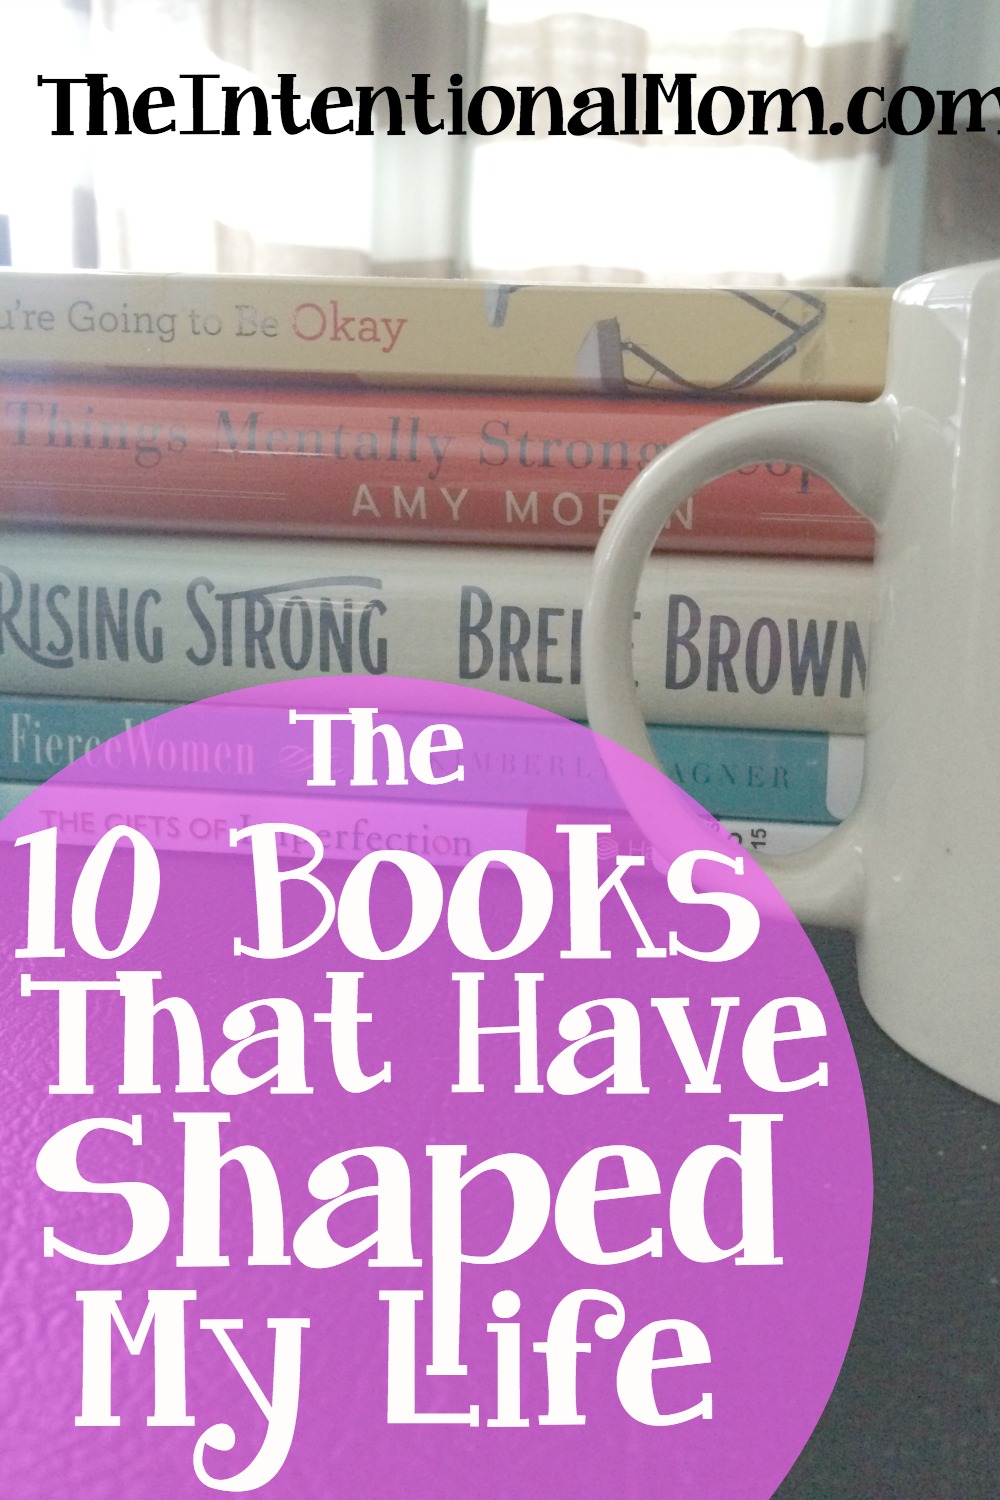 The 10 Books That Have Shaped My Life